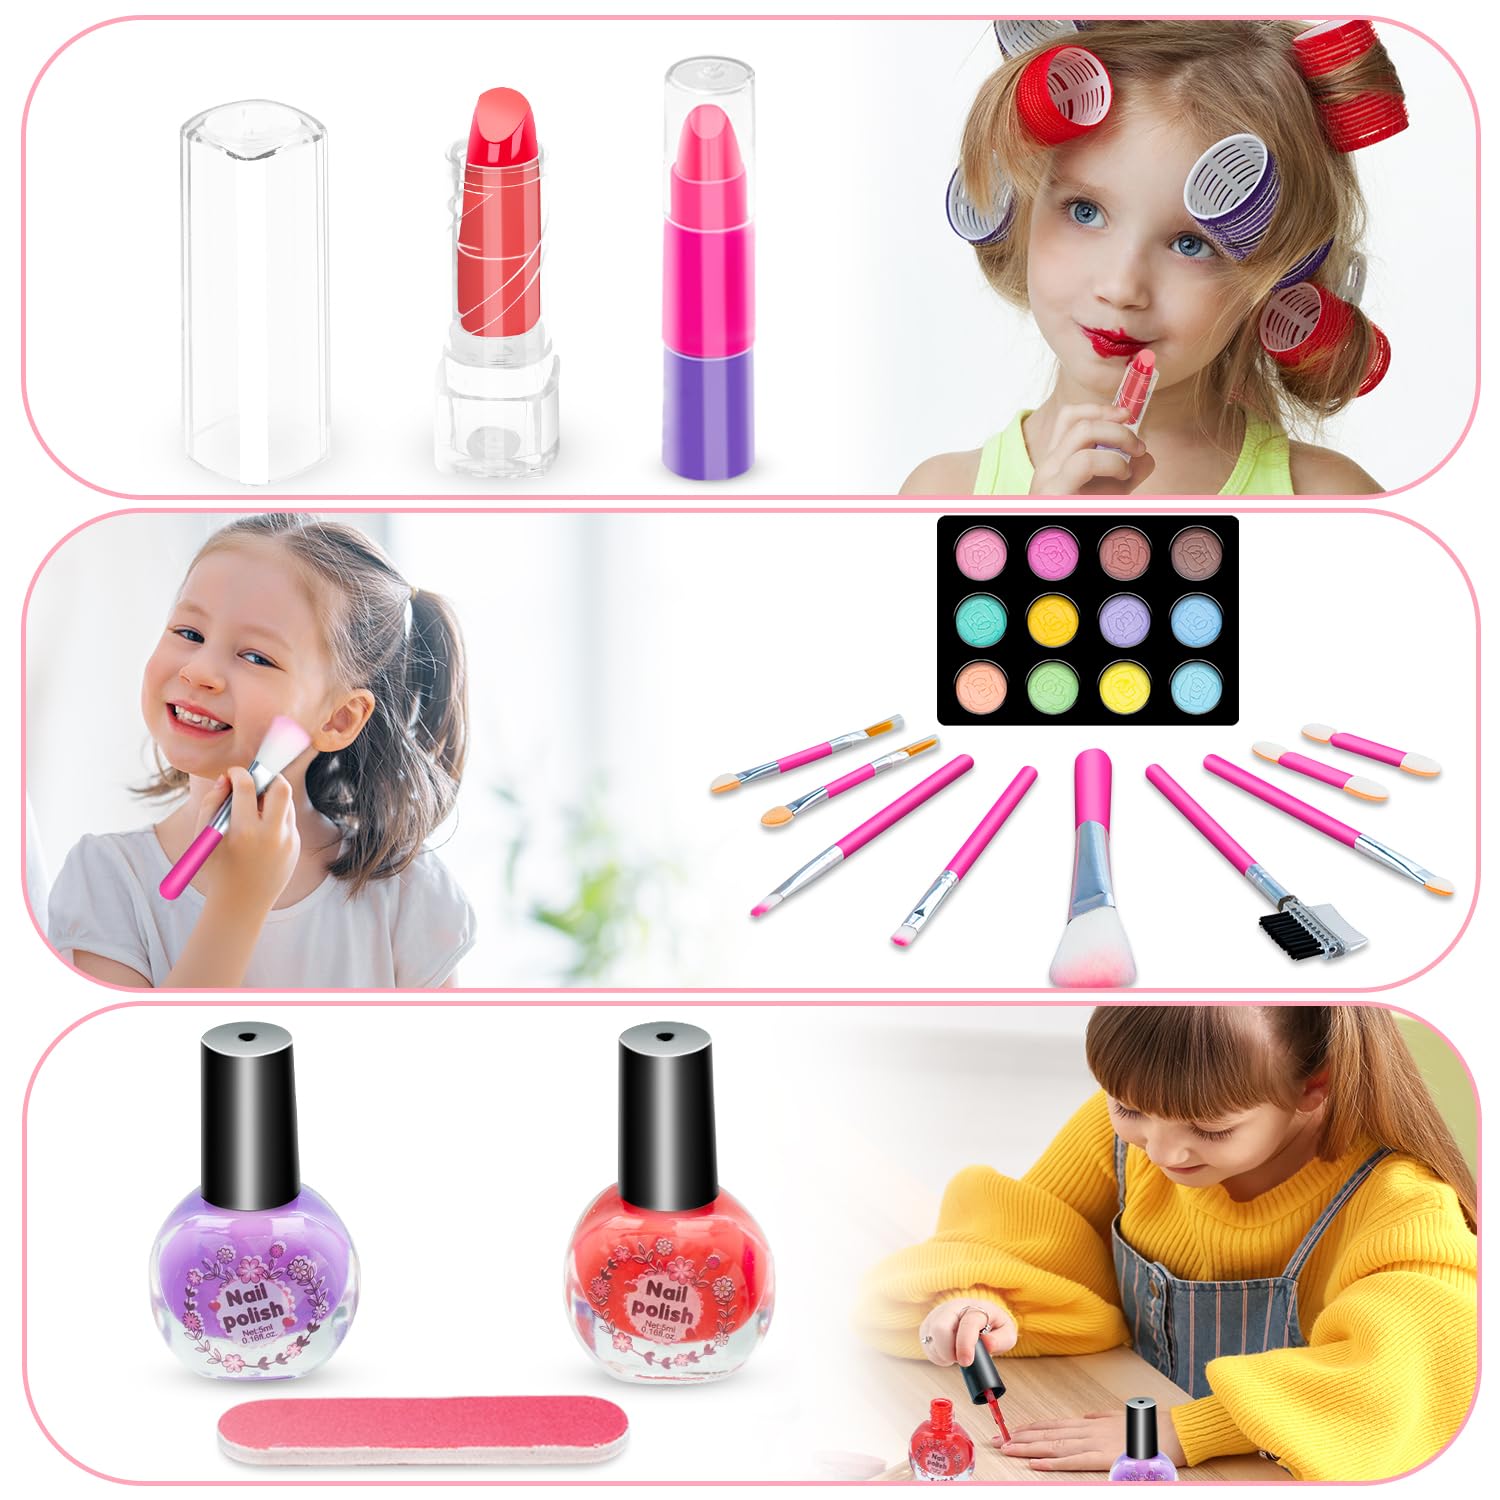 Hollyhi 47 Pcs Kids Makeup Kit for Girl, Washable Makeup Set Toy with Real Cosmetic Case for Little Girls, Pretend Play Makeup Beauty Set Birthday Toys Gift for 3 4 5 6 7 8 9 10 11 12 Years Old Kid